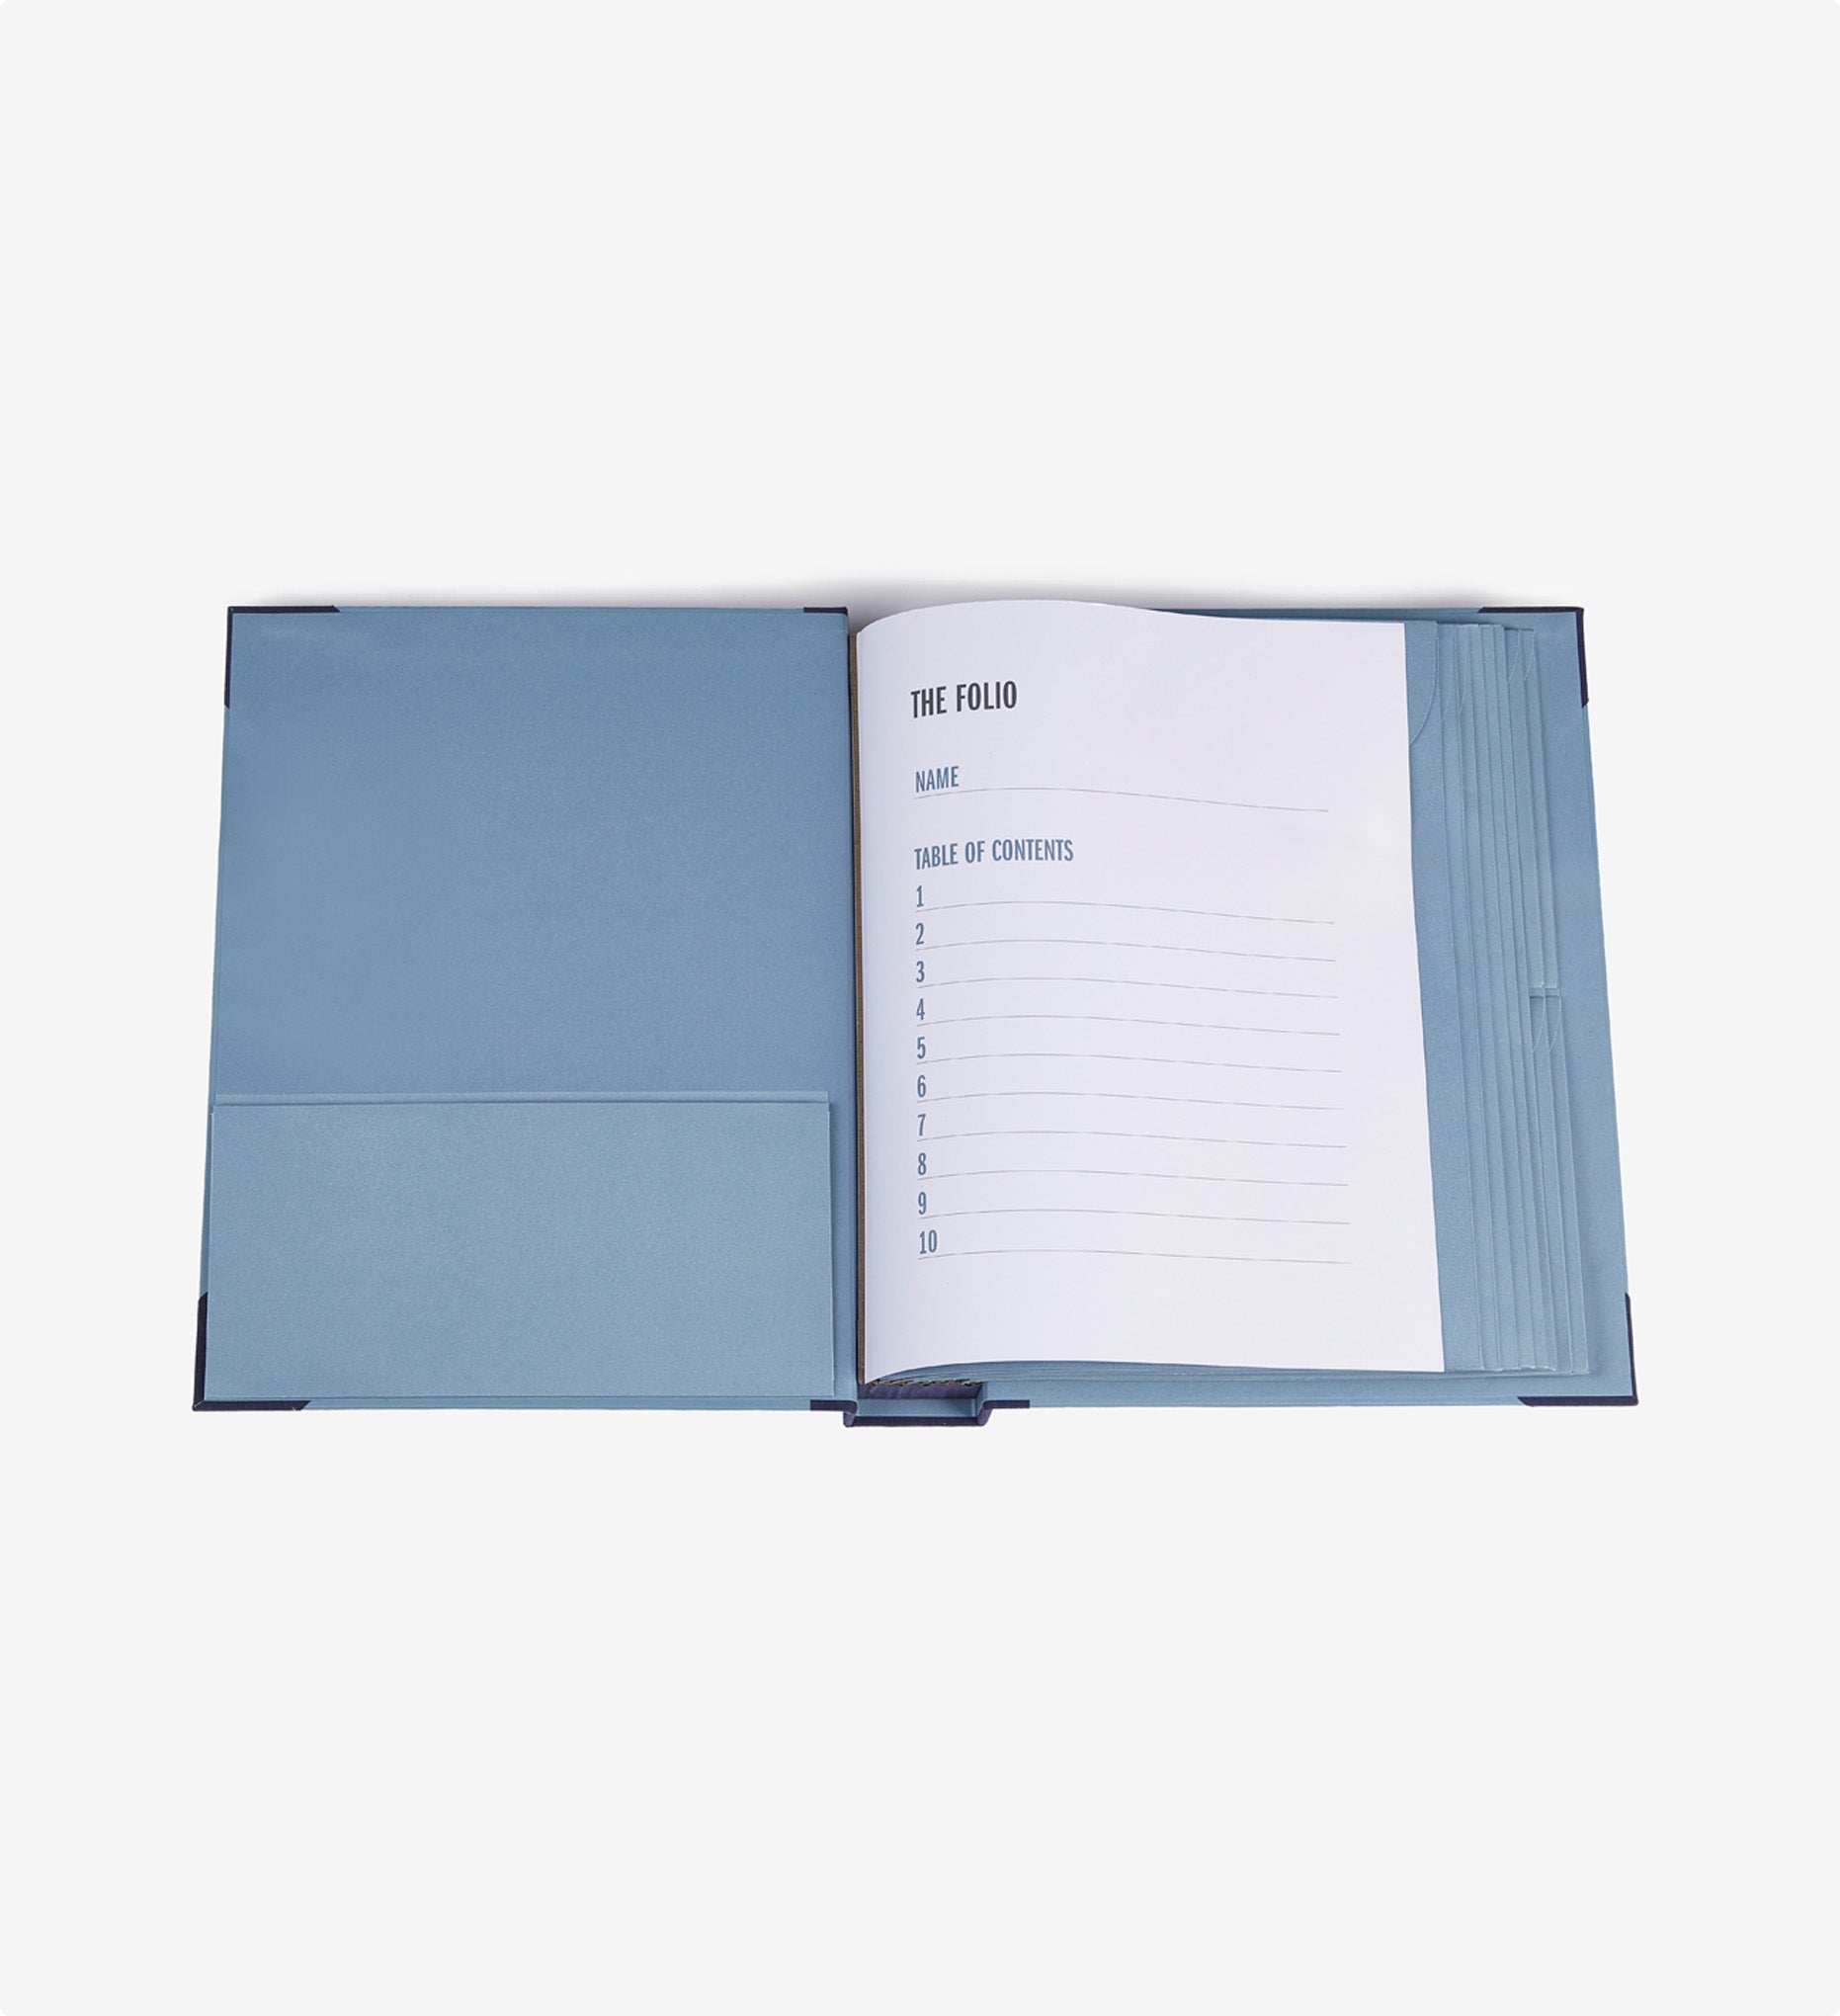 Savor folio document organizer, open with table of contents